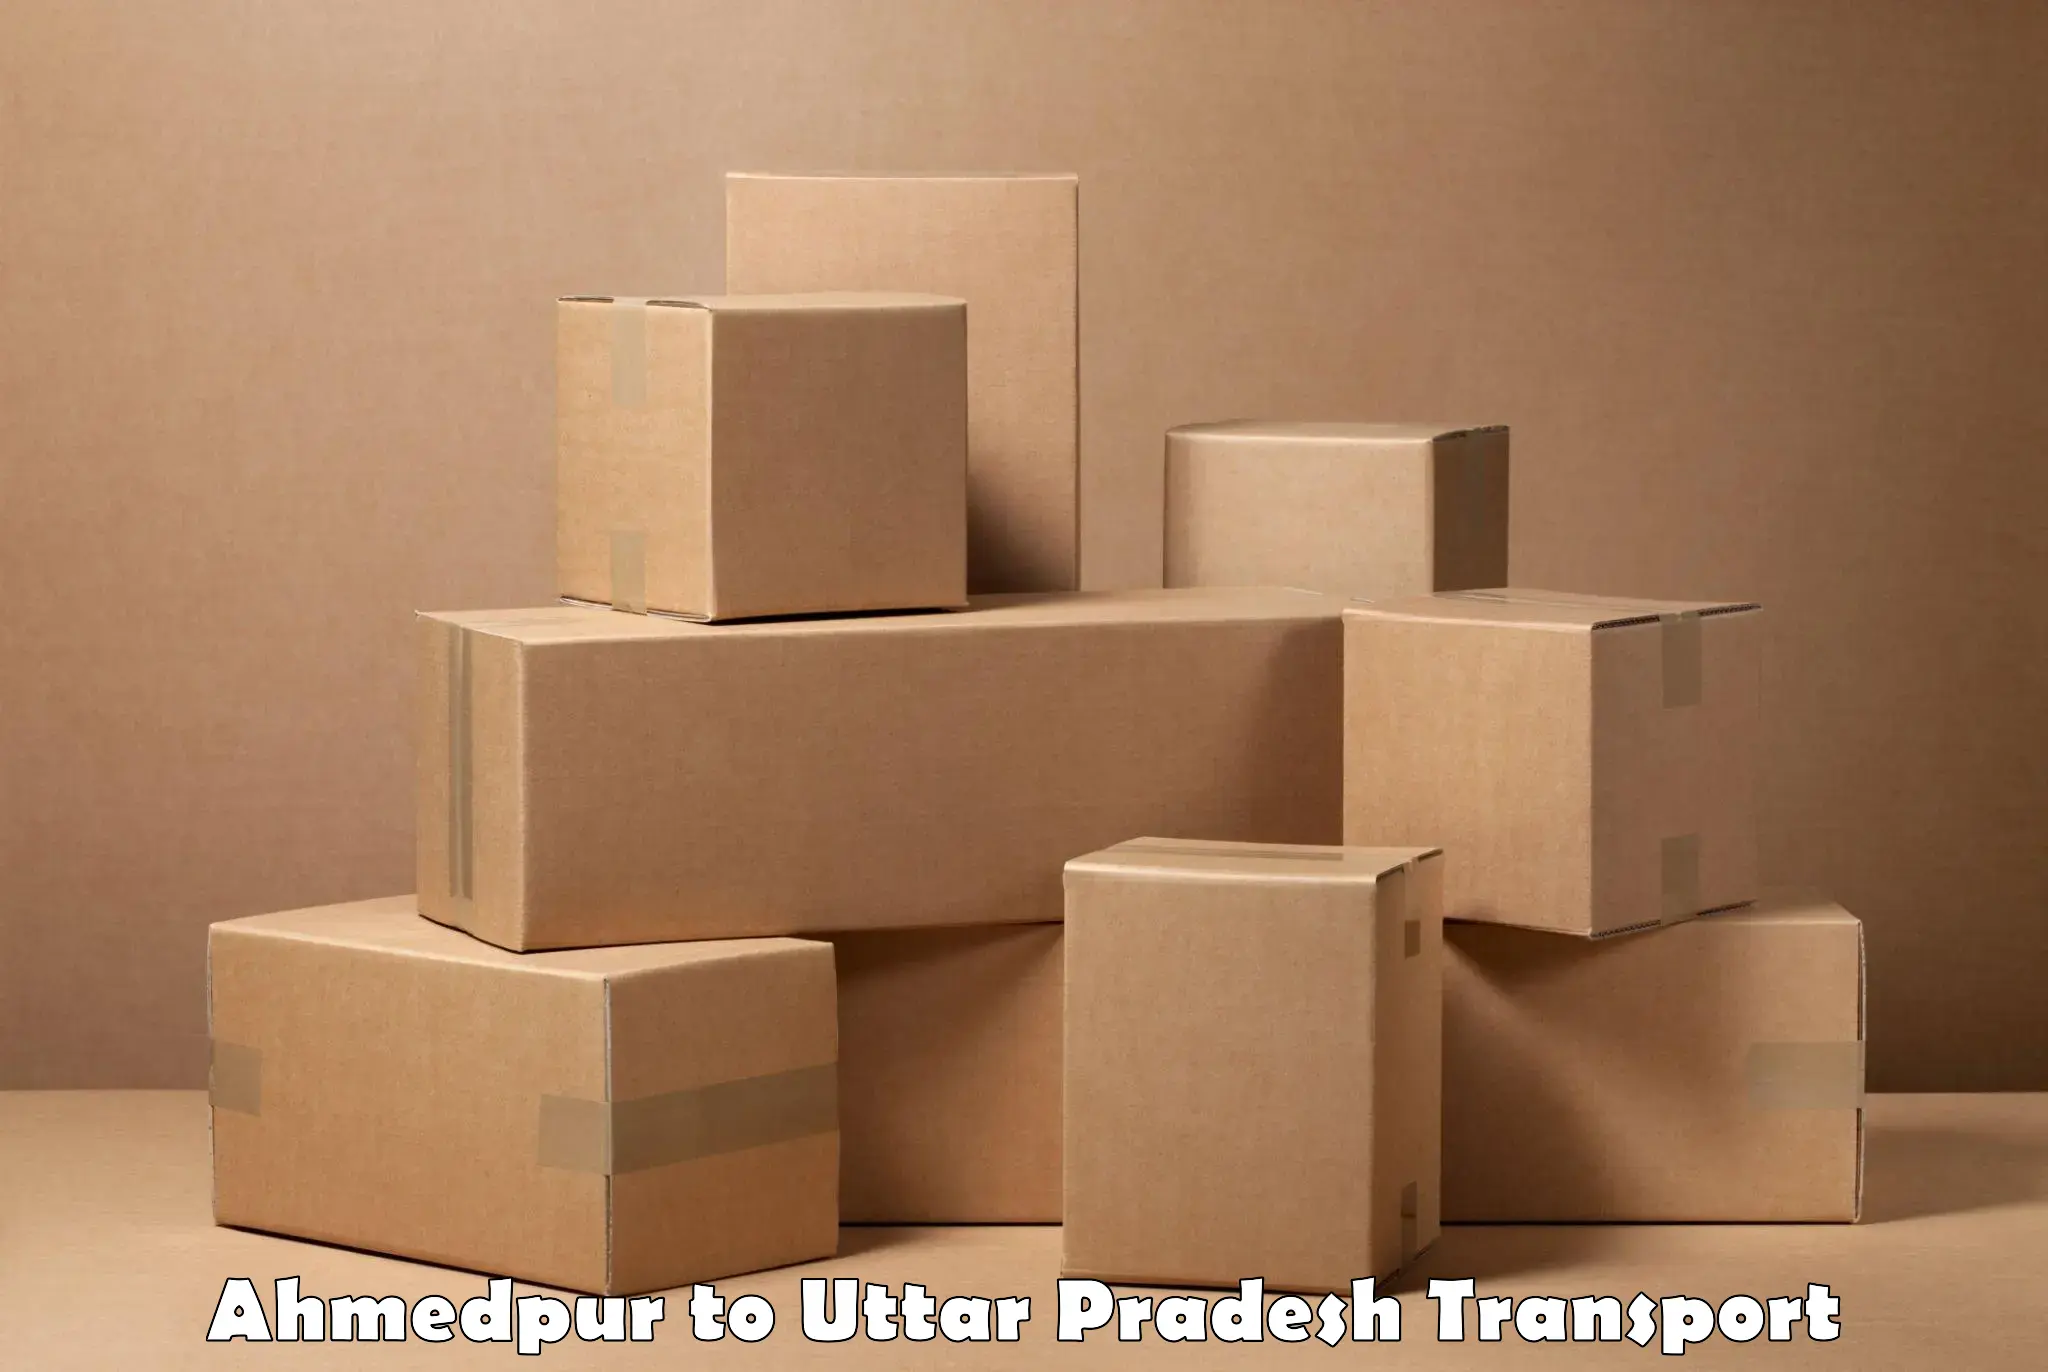 Lorry transport service Ahmedpur to Mirzapur